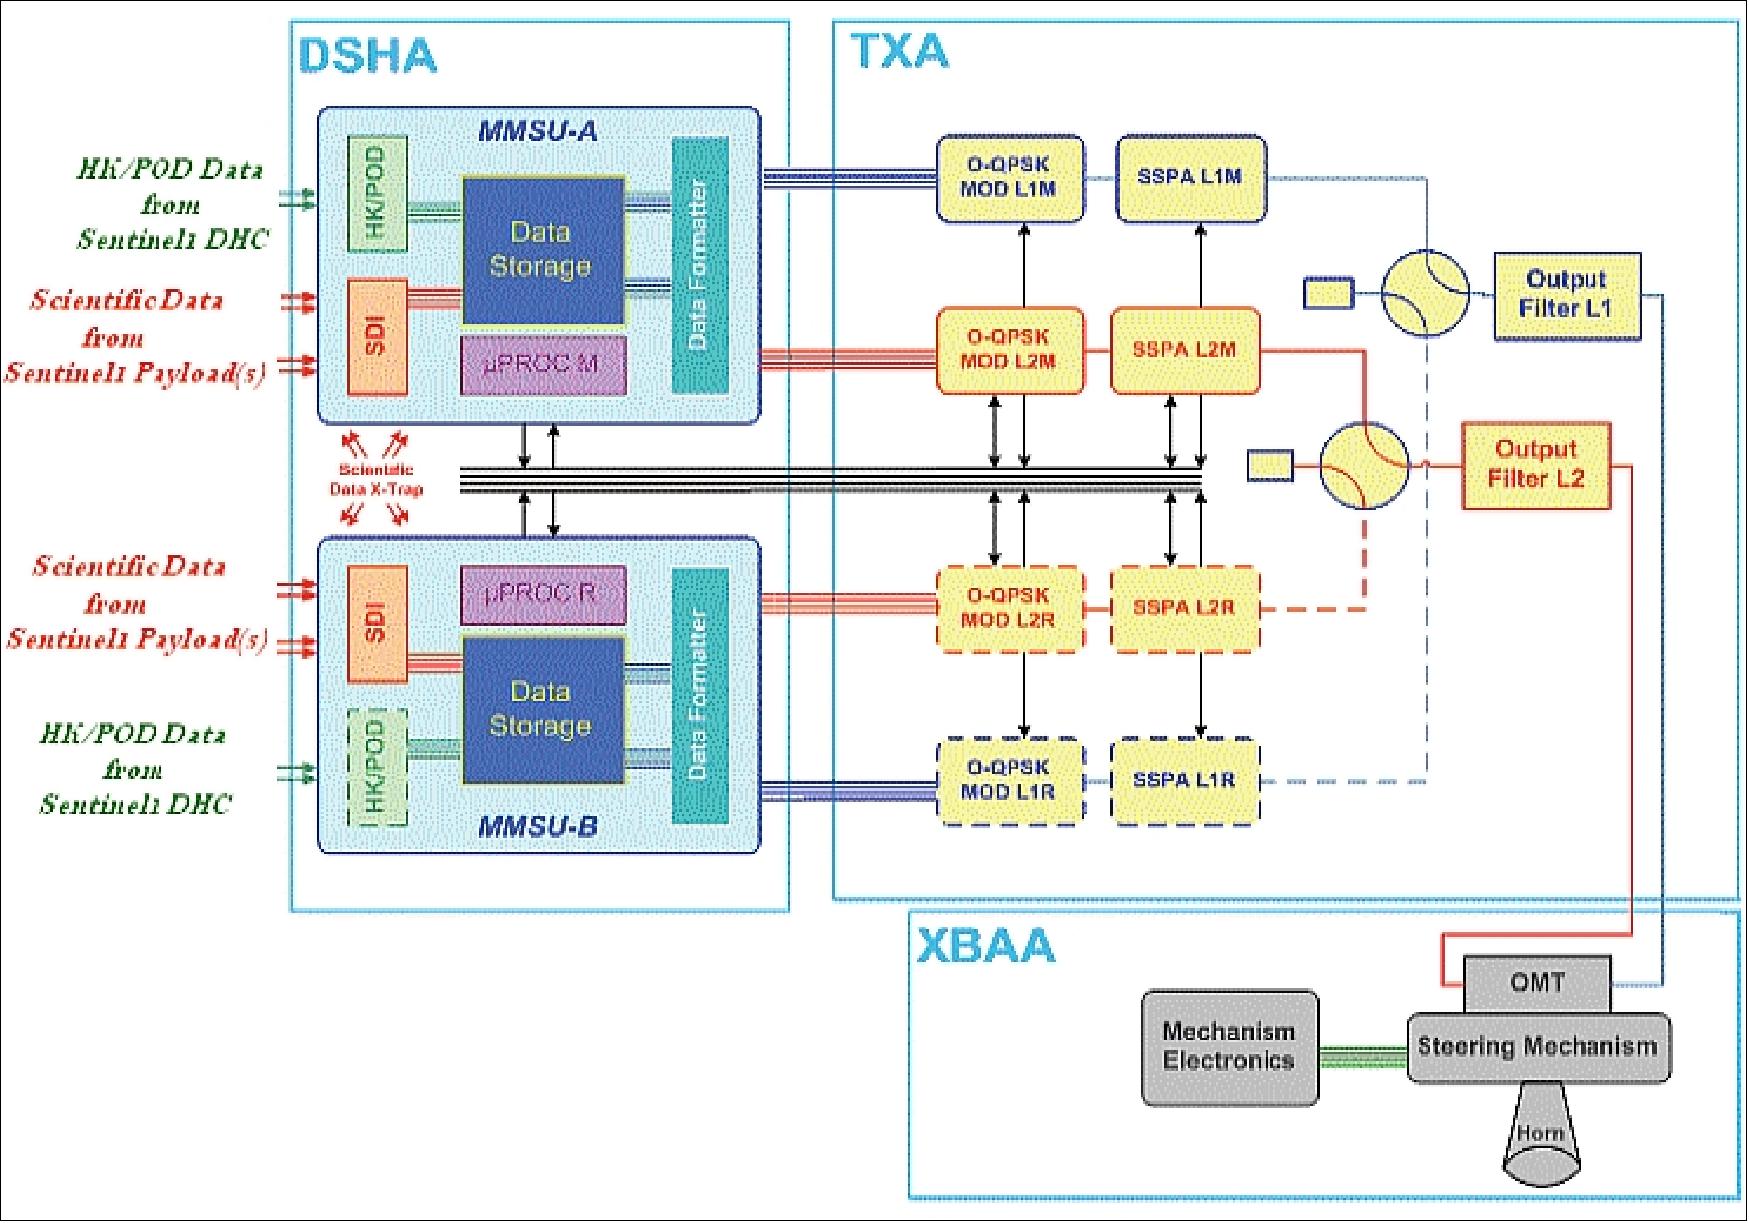 The PDHT (Payload Data Handling & Transmission) subsystem